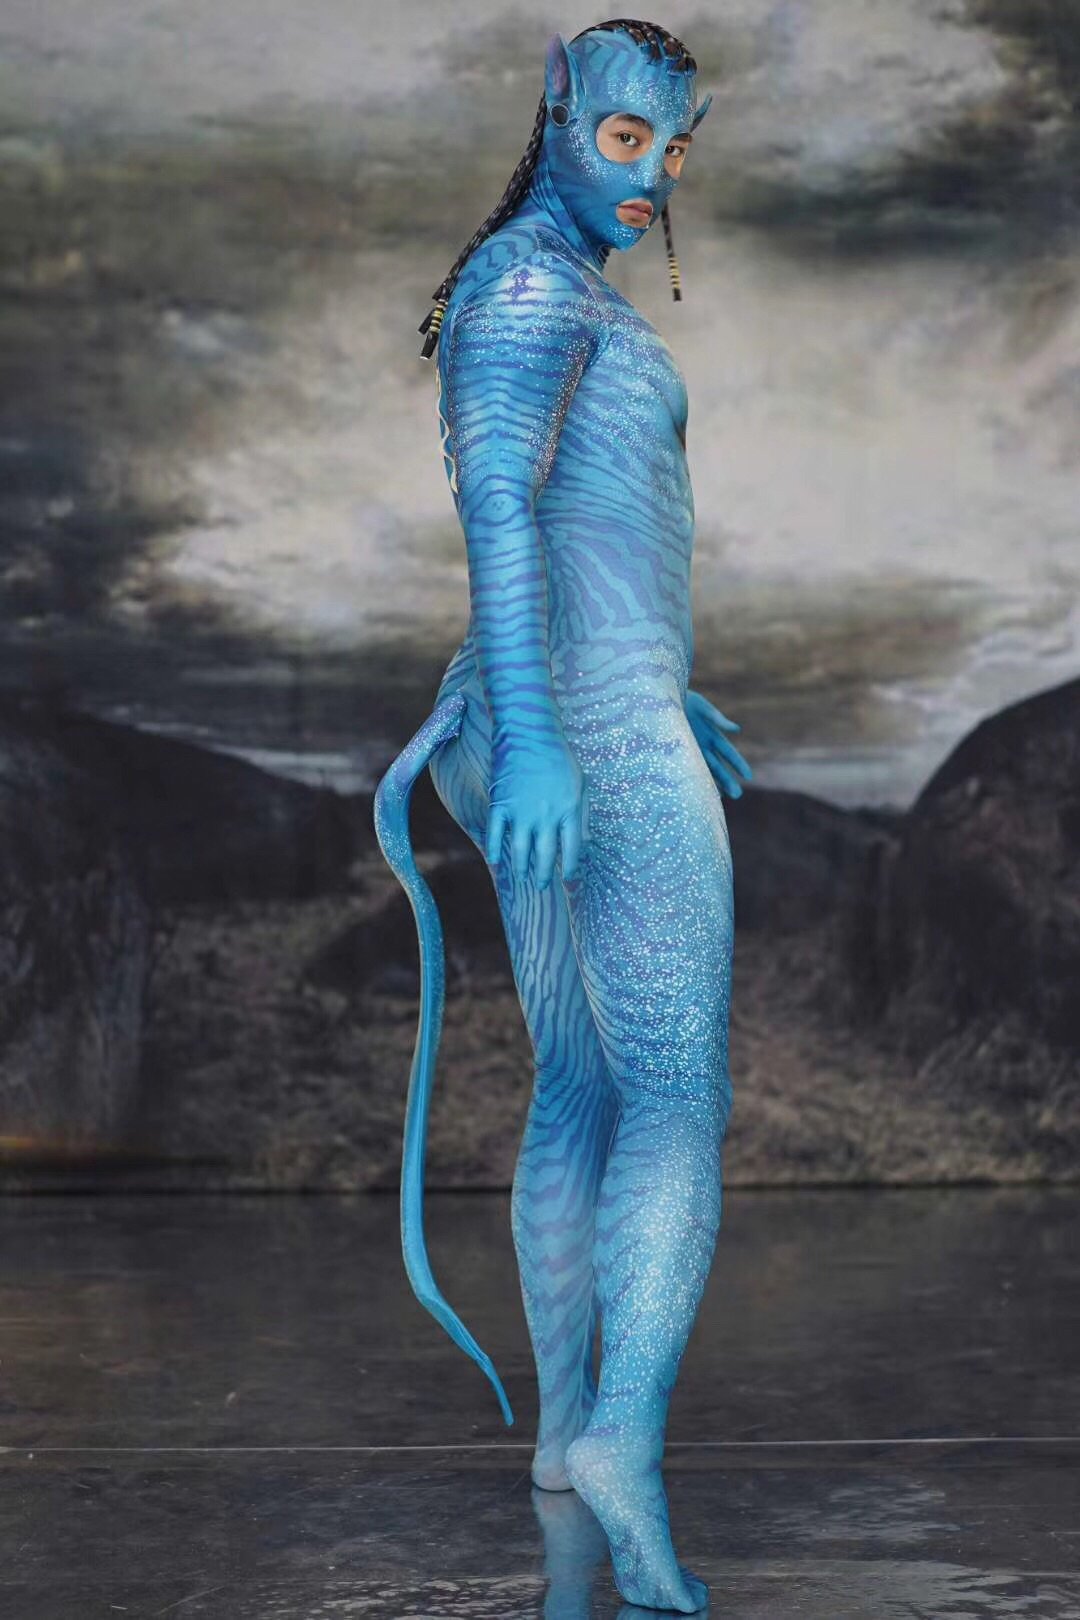 Avatar bodysuit party & events costume (Men)ship same day